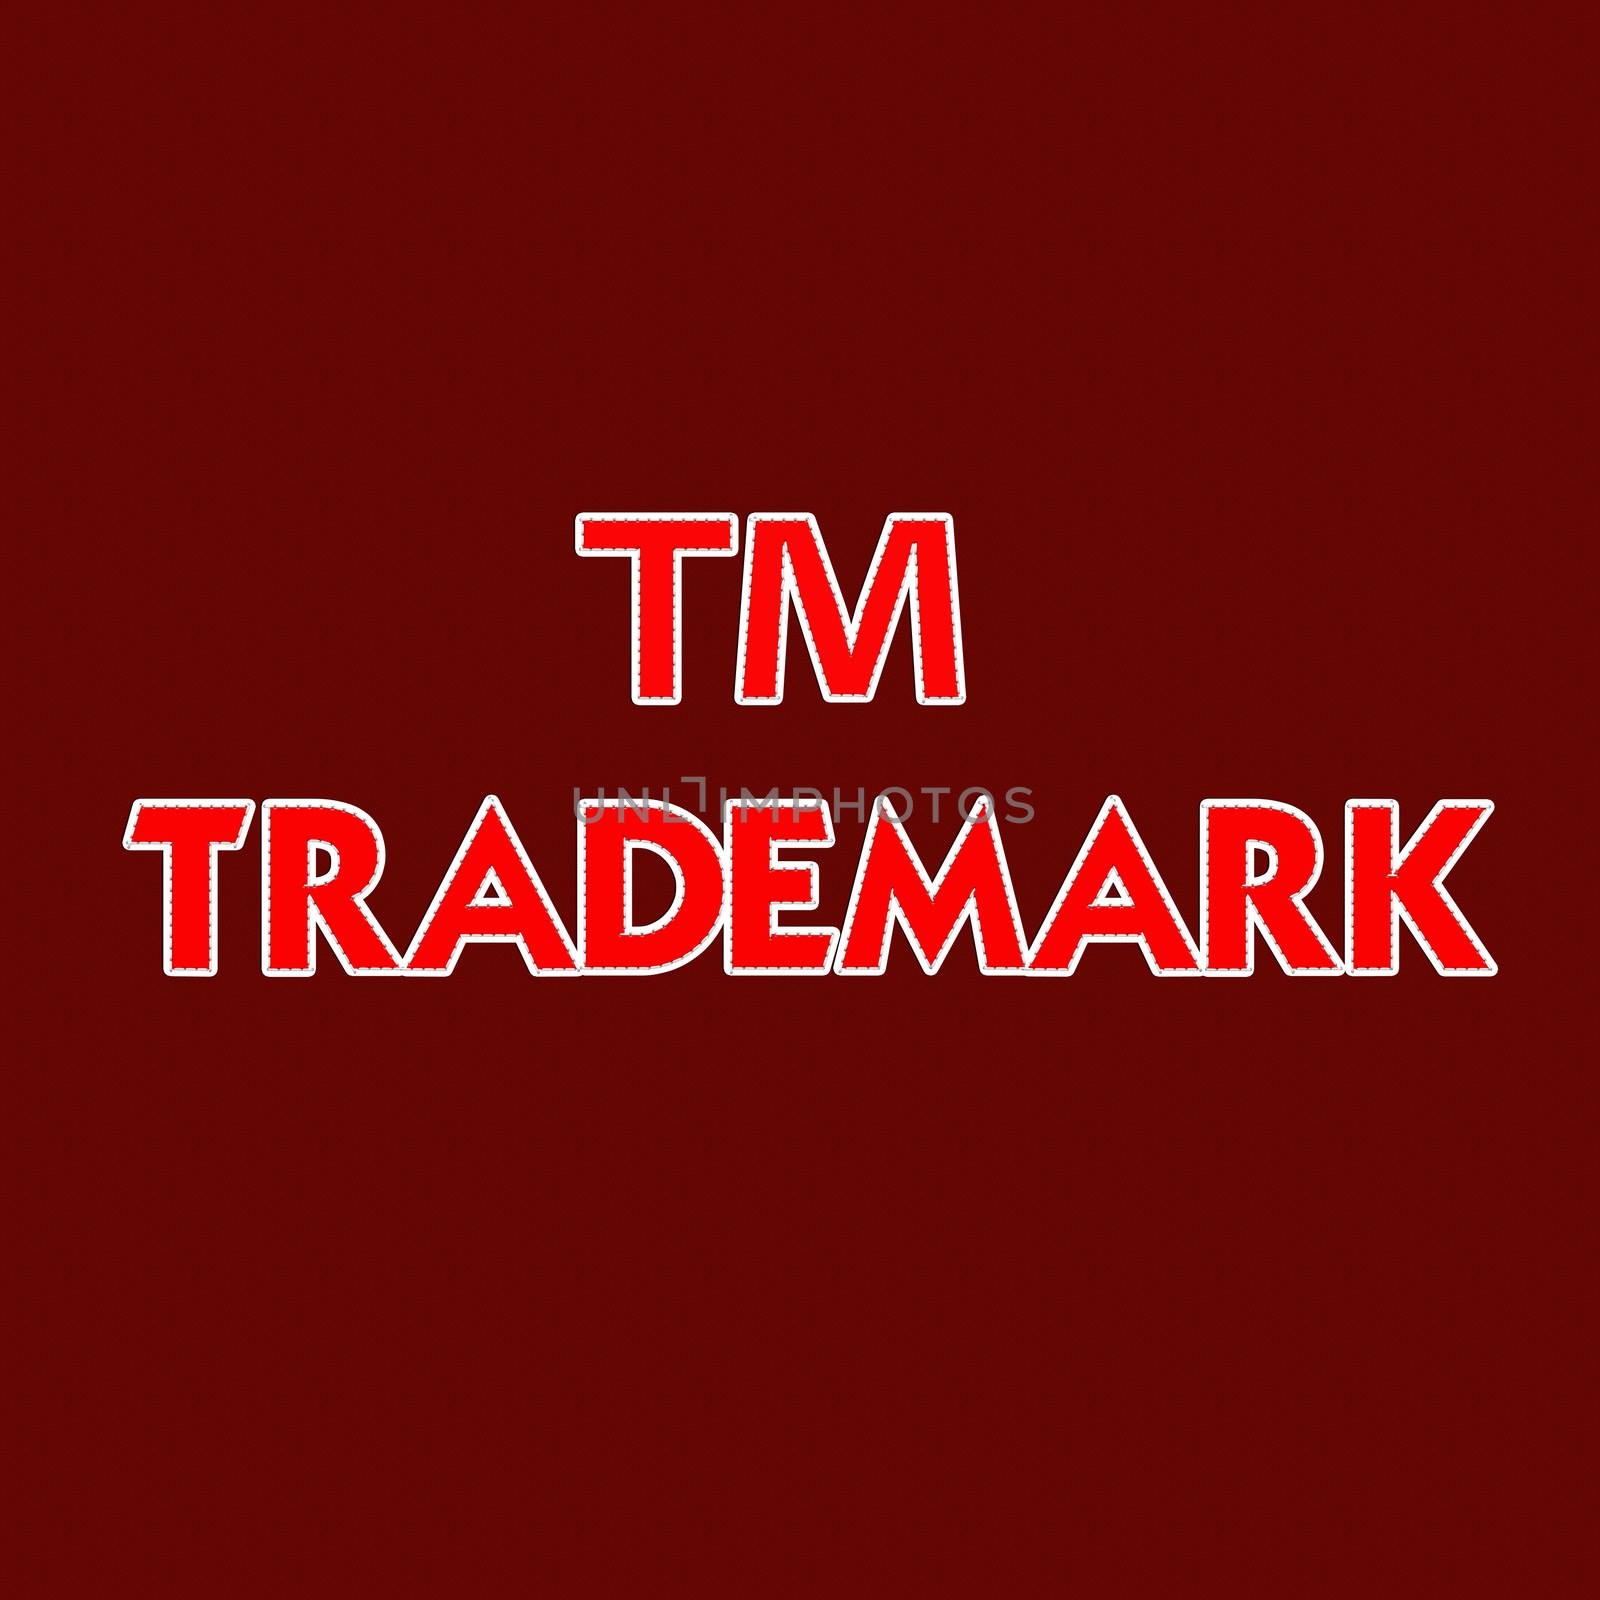 Copyright registered and trademark symbols isolated over white w by basketman23